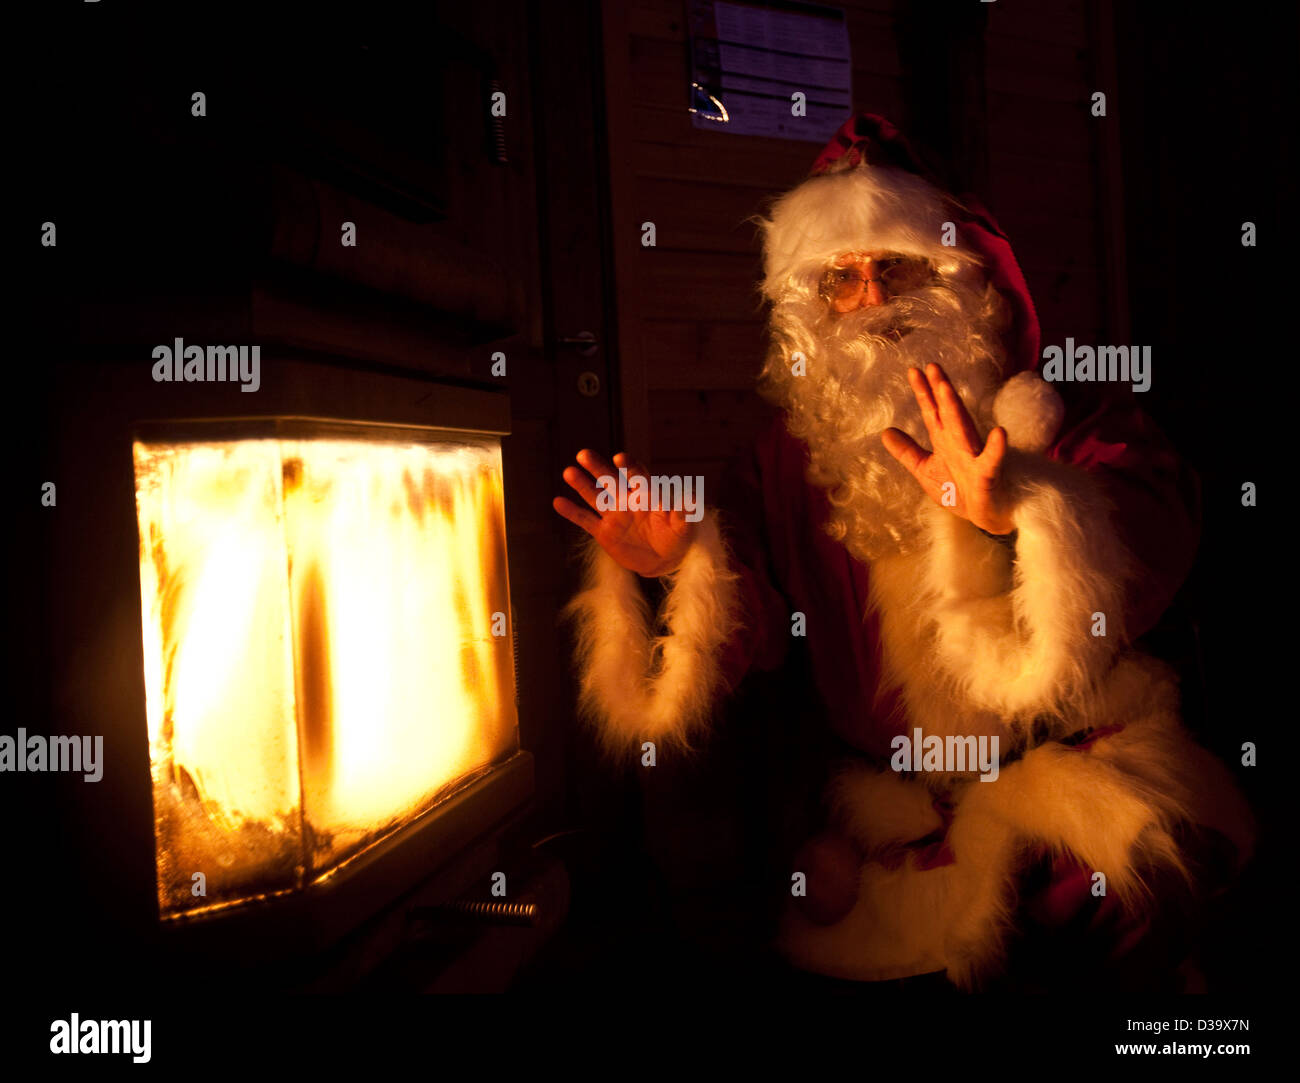 Man in father christmas costume warming hands by fire, Lapland Stock Photo